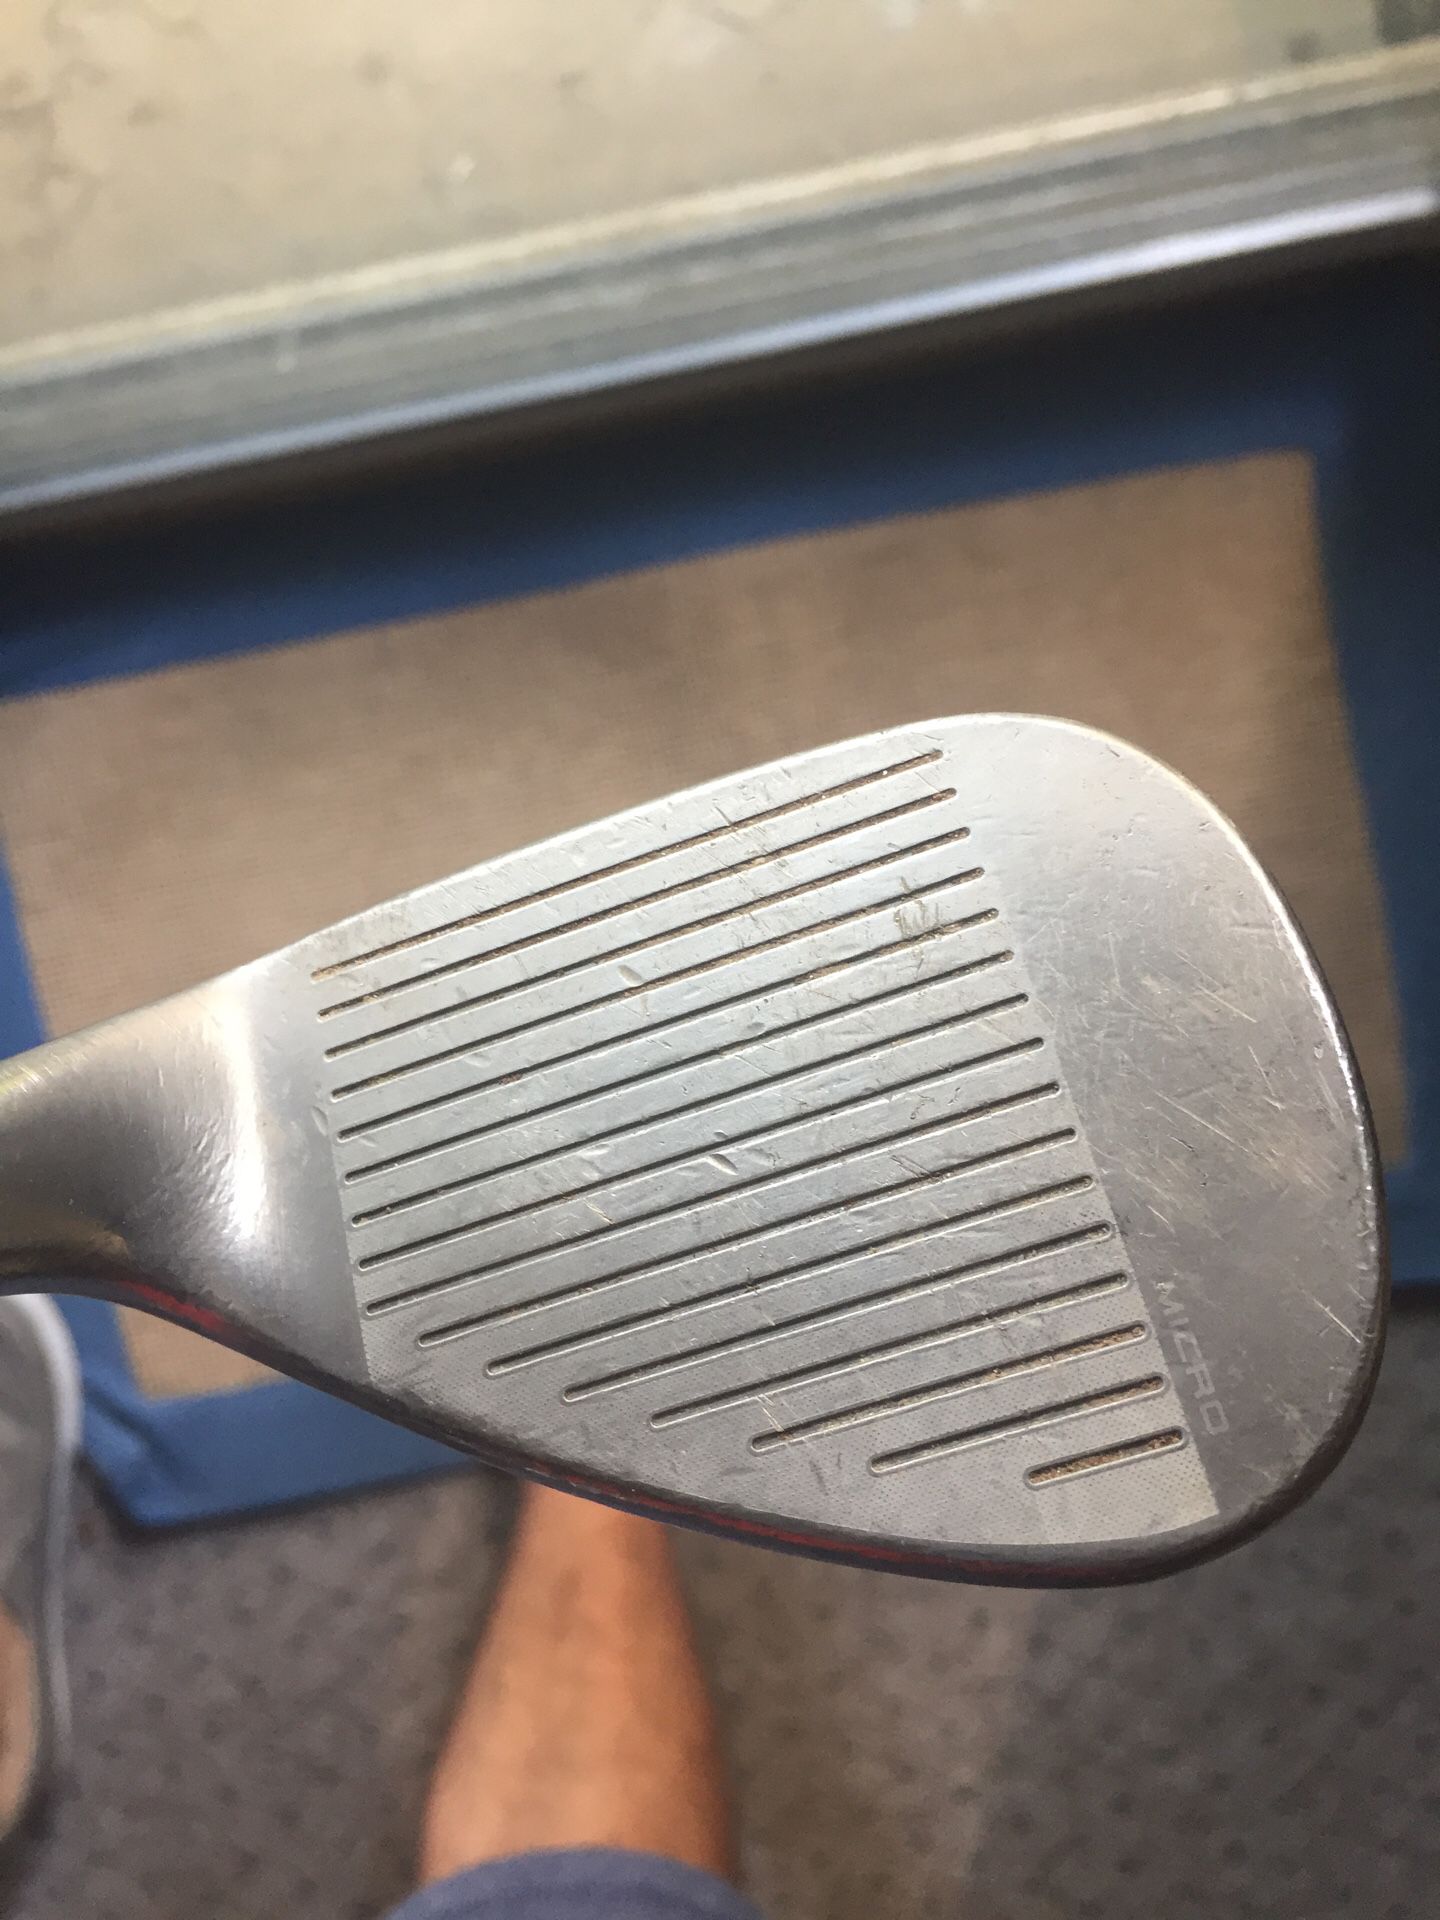 TaylorMade tour preferred - 56 degree wedge - good condition